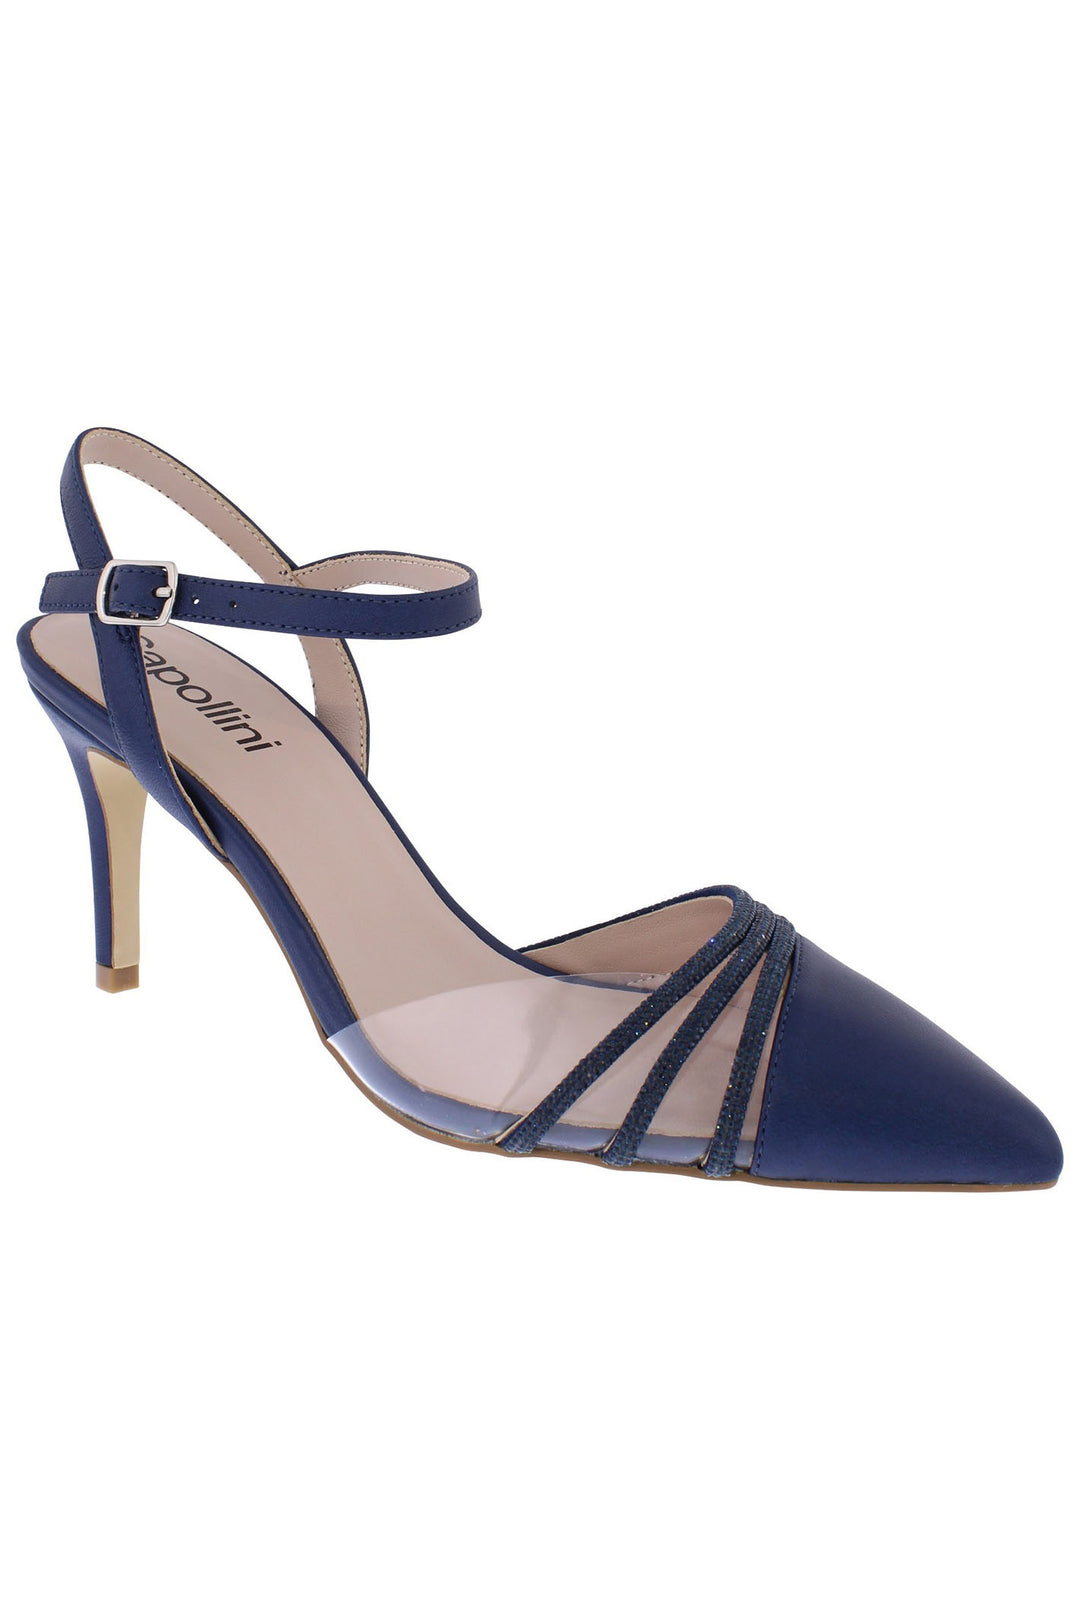 Capollini C231 Ophelia Navy Heeled Sling Back Occasion Shoe - Rouge Boutique Inverness